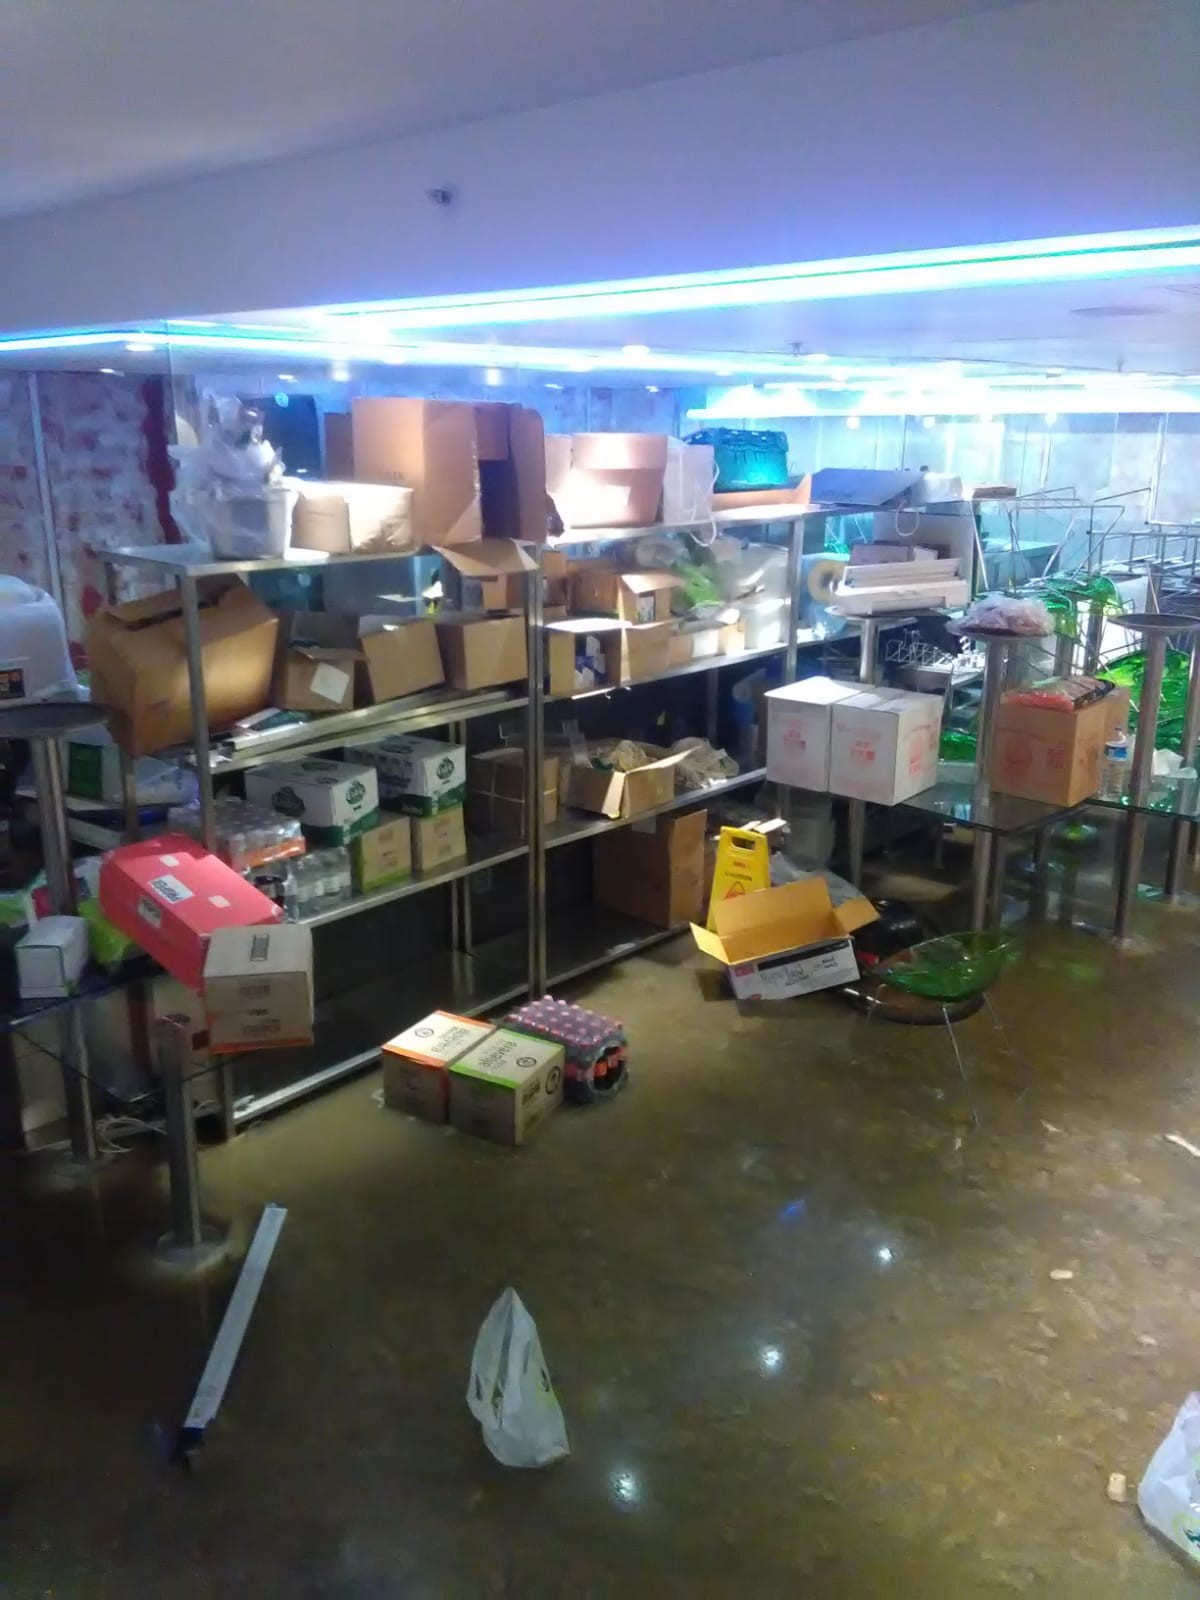 A stockroom affected by a sewage spill.